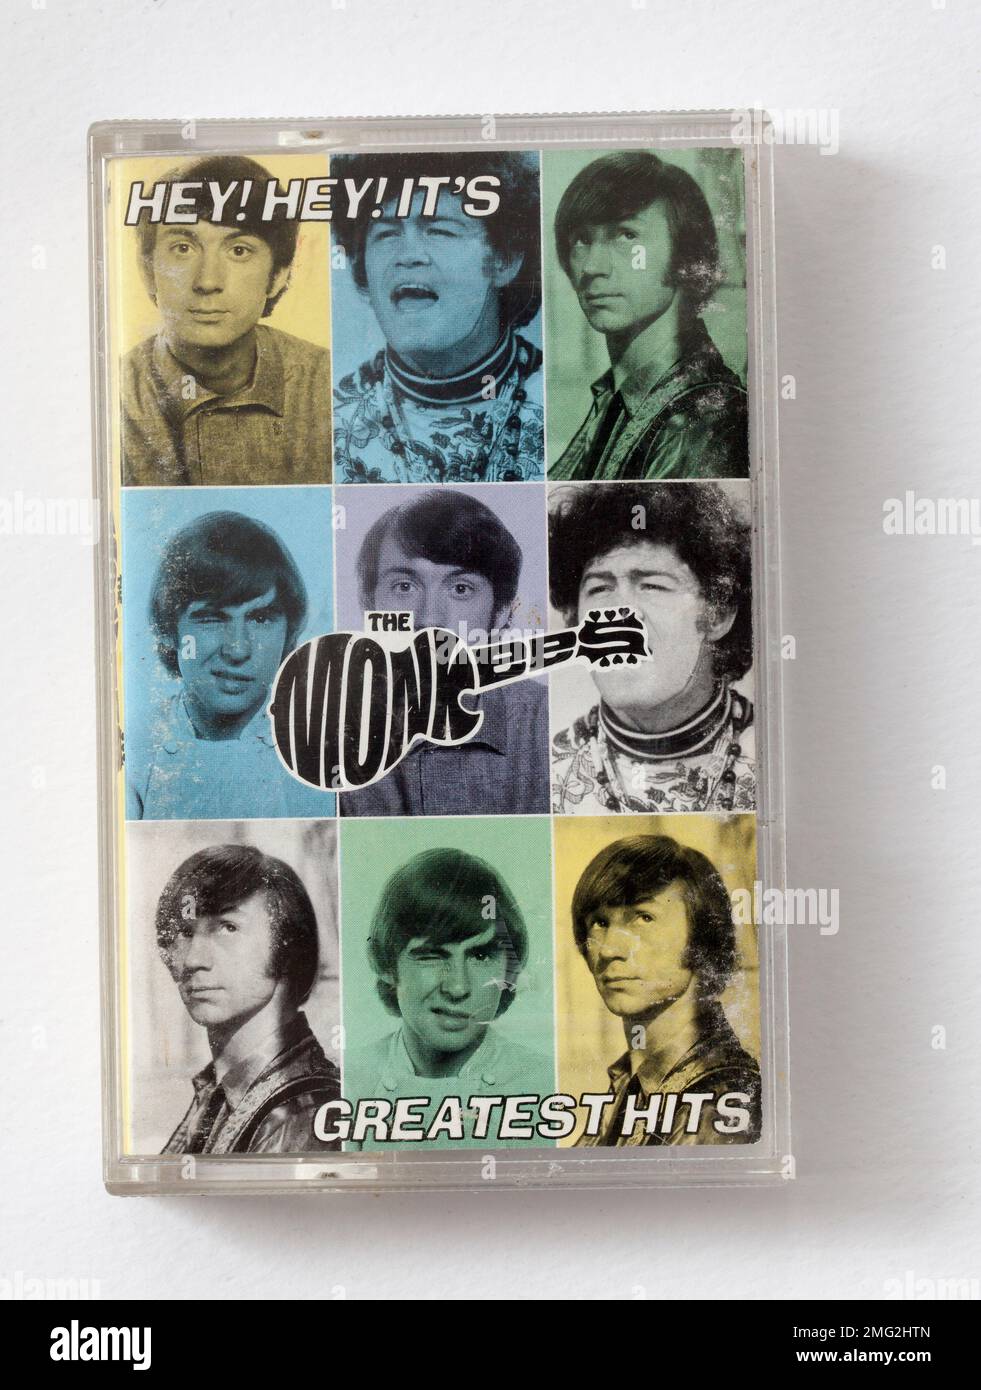 The Monkees Music Cassette - Hey Hey Its The Monkees Stock Photo